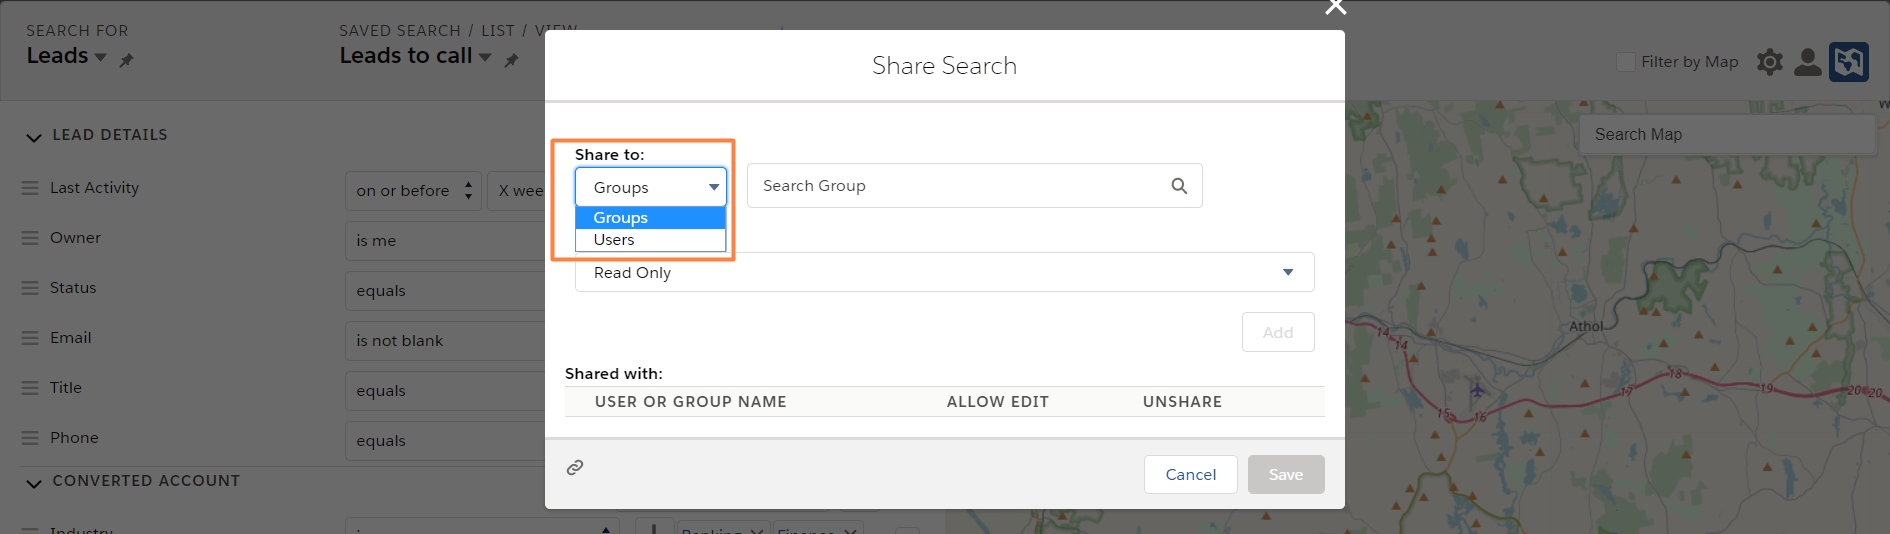 Sharing search